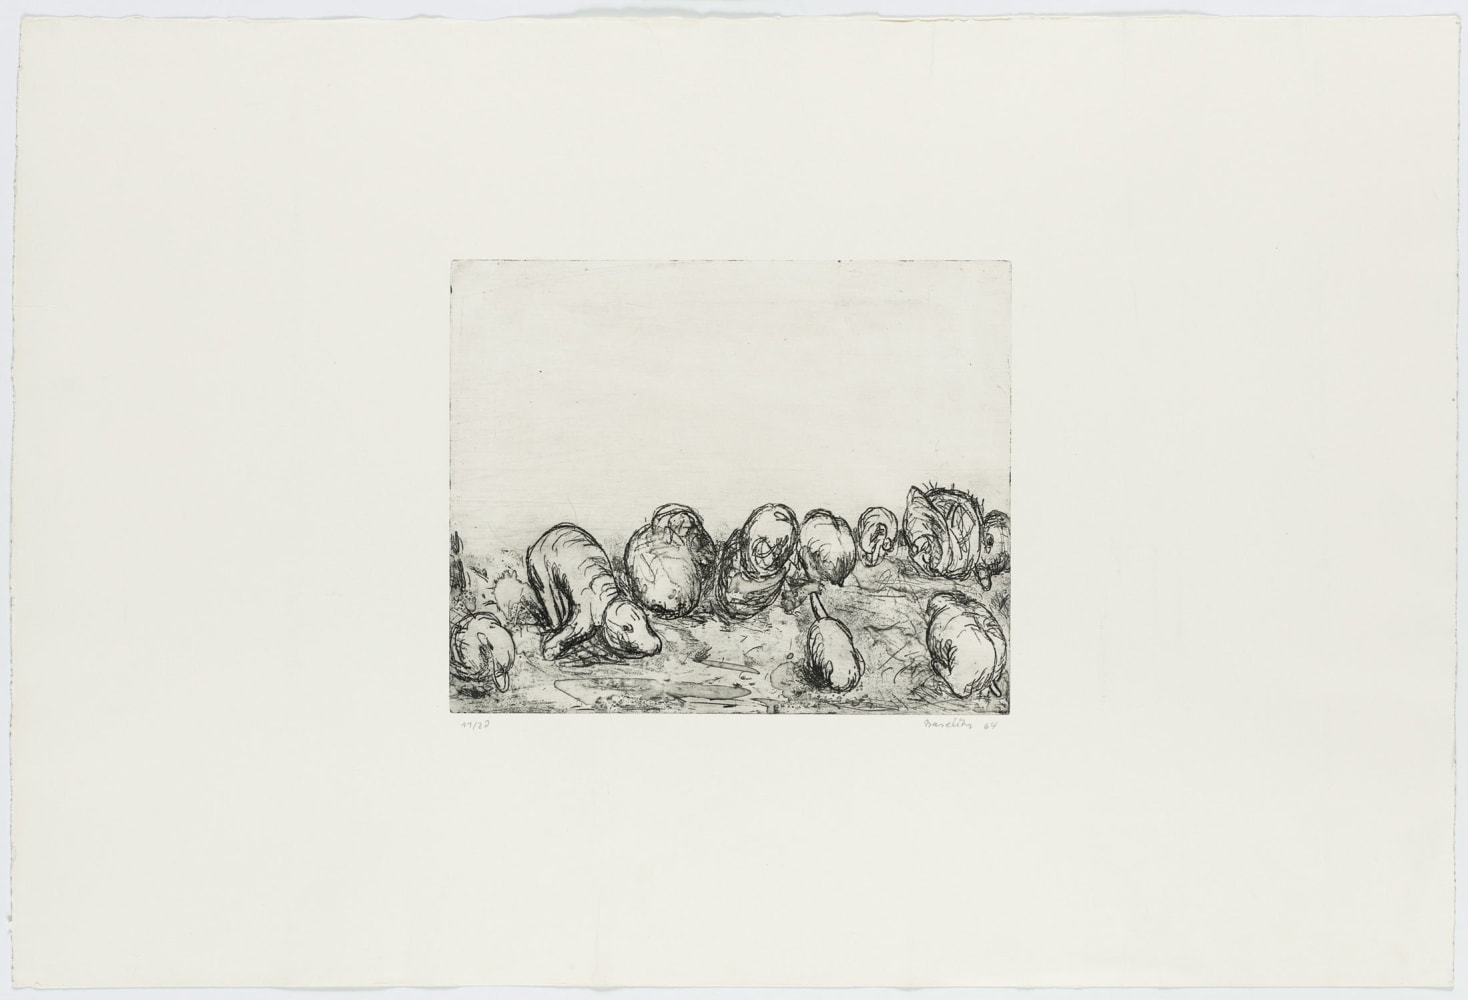 Georg Baselitz
Heulende Hunde [Howling Dogs], 1964
Signed/Dated: 11/20; Baselitz 64
Etching and soft-ground etching on zinc plate; on copper printing paper
Image size: 9 3/4 x 12 inches (24.8 x 30.5 cm)
Paper size: 20 7/8 x 31 inches (53 x 78.7 cm)
Framed dimensions: 24 13/16 x 36 1/2 inches (63 x 92.7 cm)
&amp;copy; Georg Baselitz 2021
Photo: &amp;copy;&amp;nbsp;bernhardstrauss.com